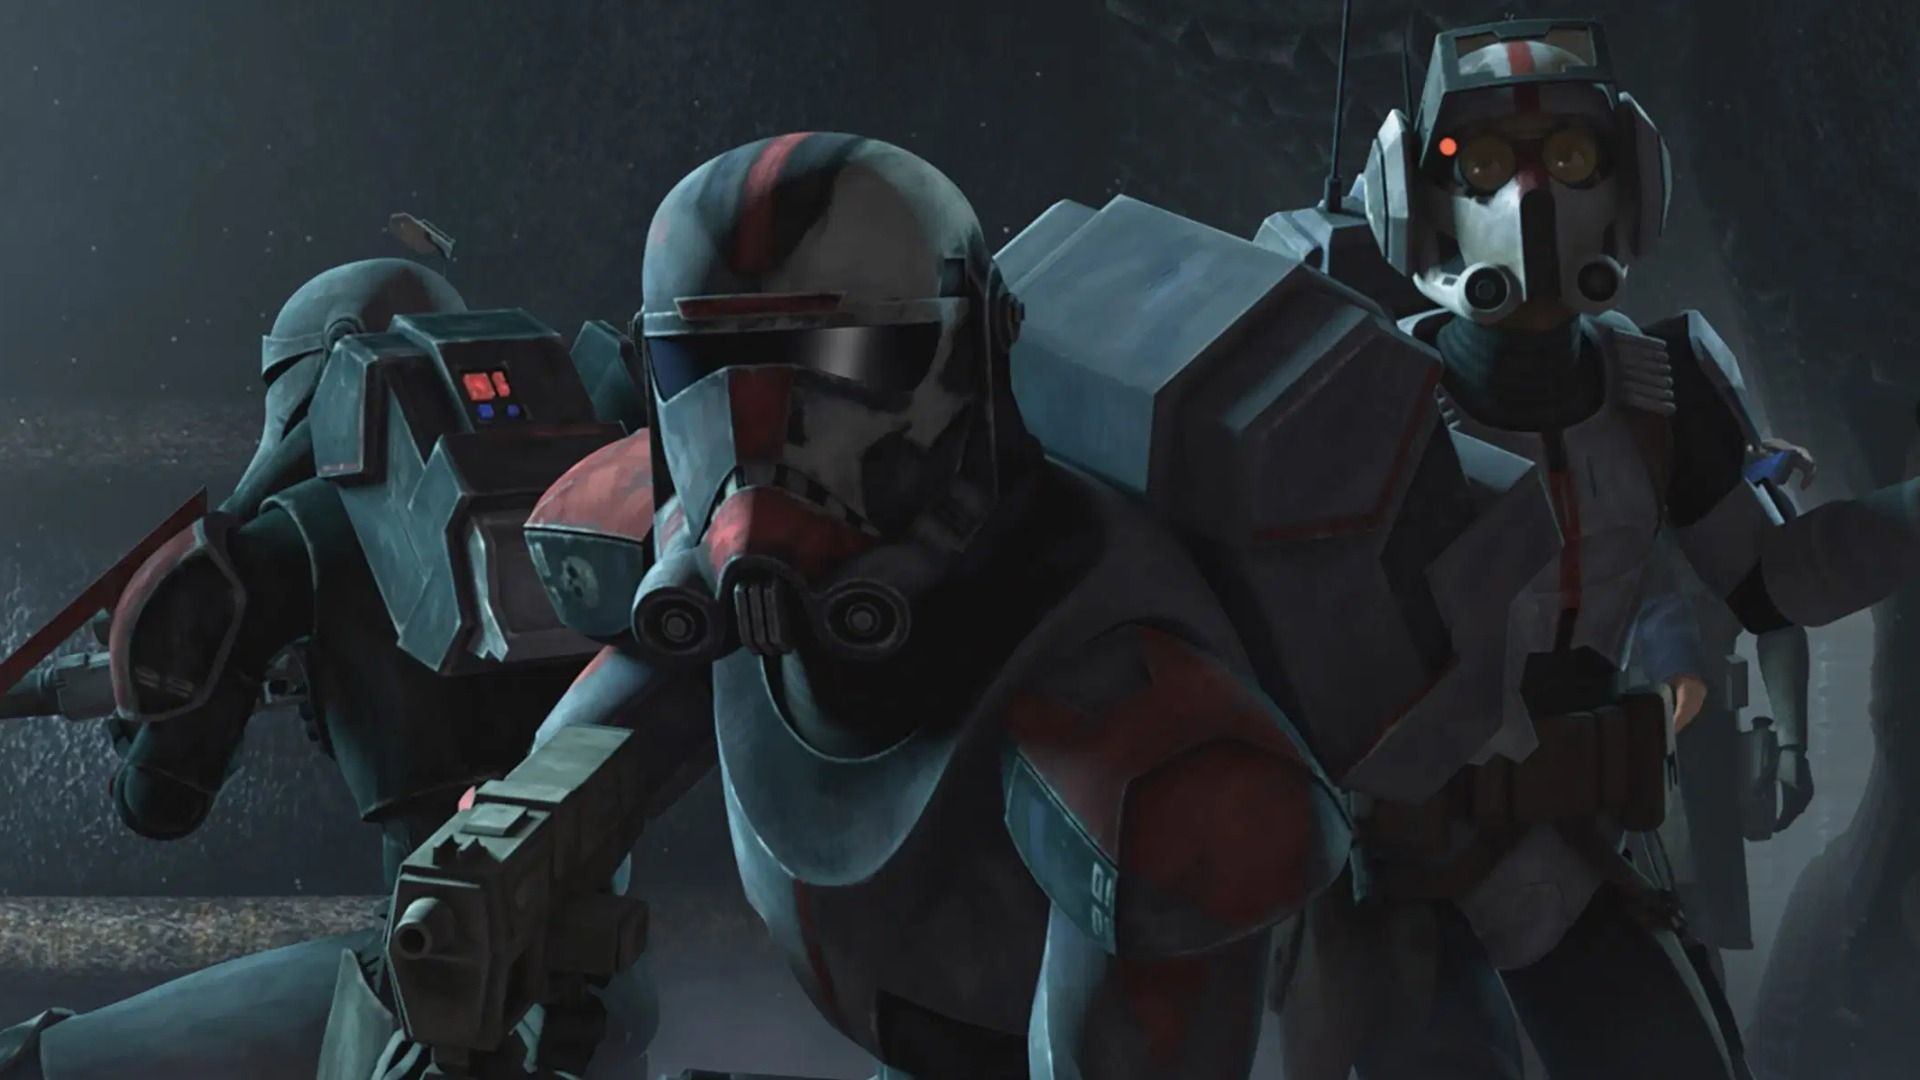 Star Wars: The Clone Wars season 7 episode 3: There's no neutrality in a star war